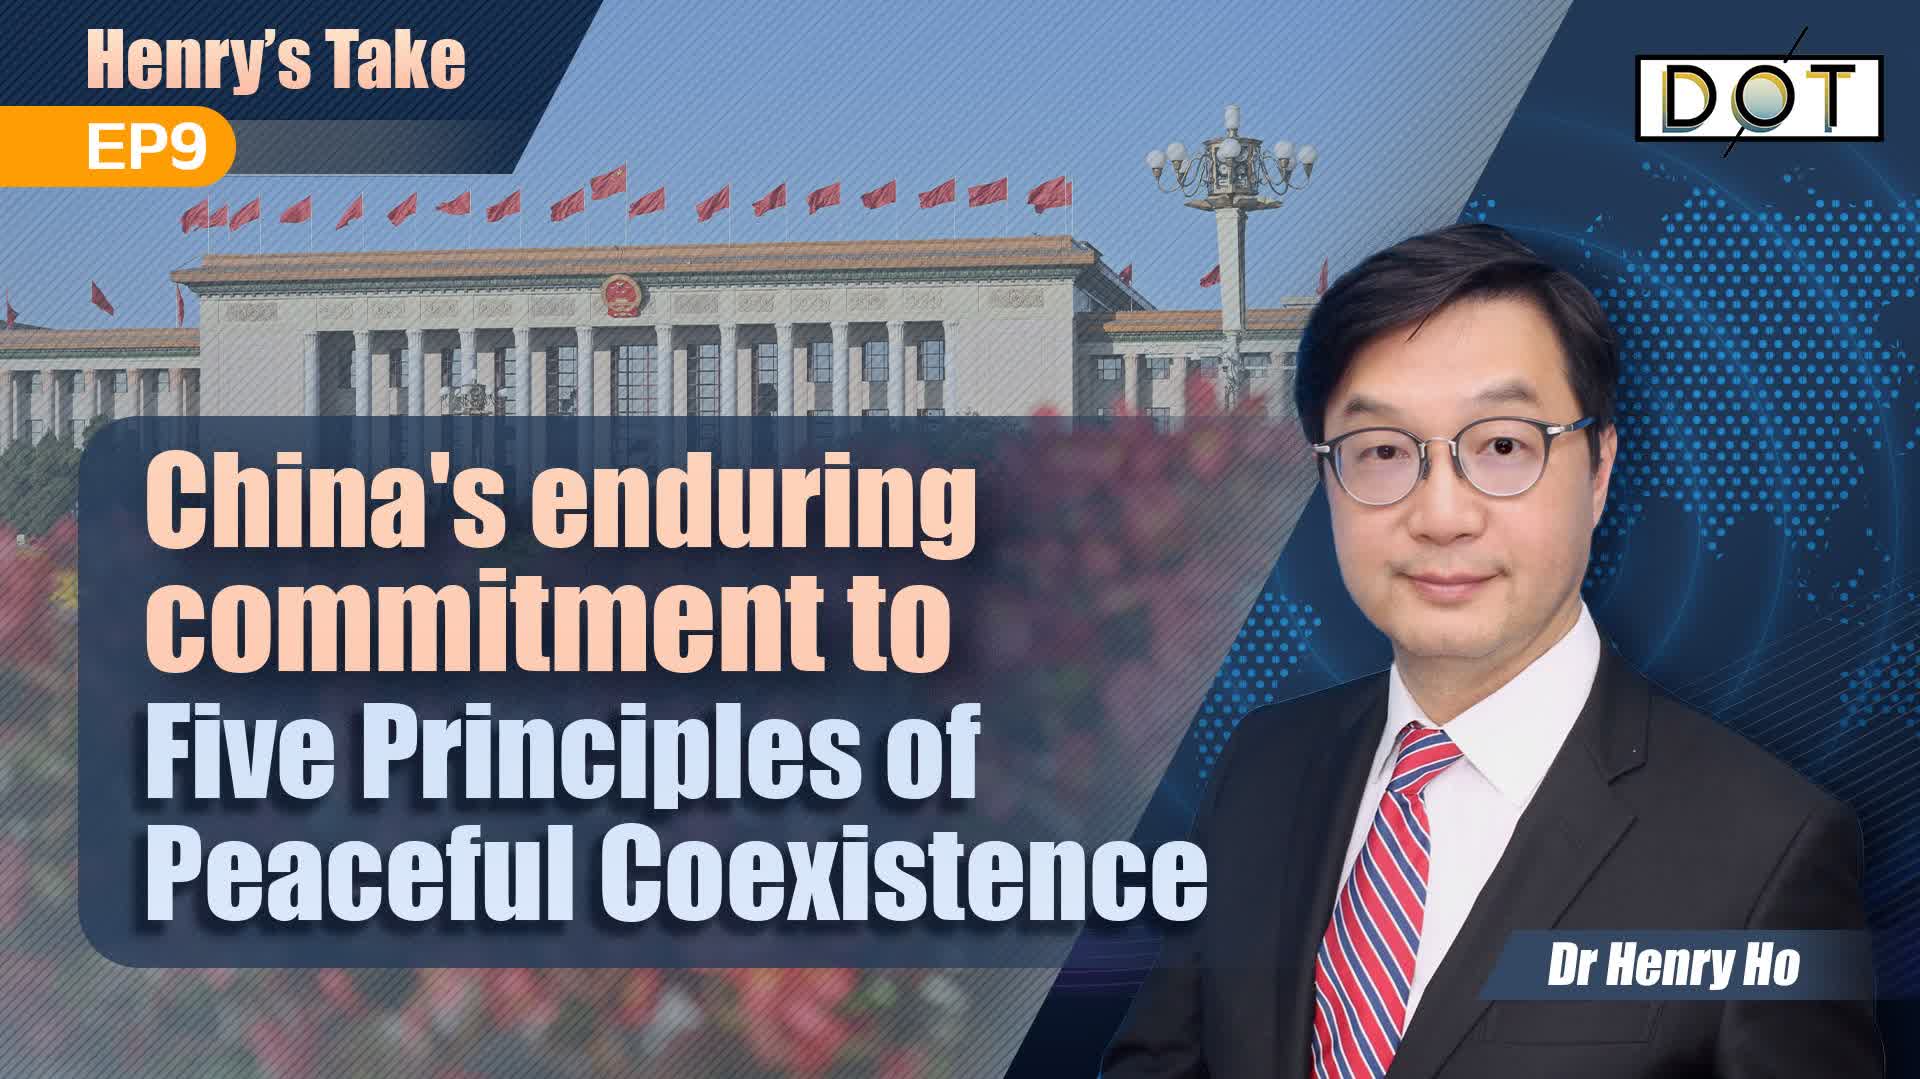 Henry's Take EP9 | China's enduring commitment to Five Principles of Peaceful Coexistence